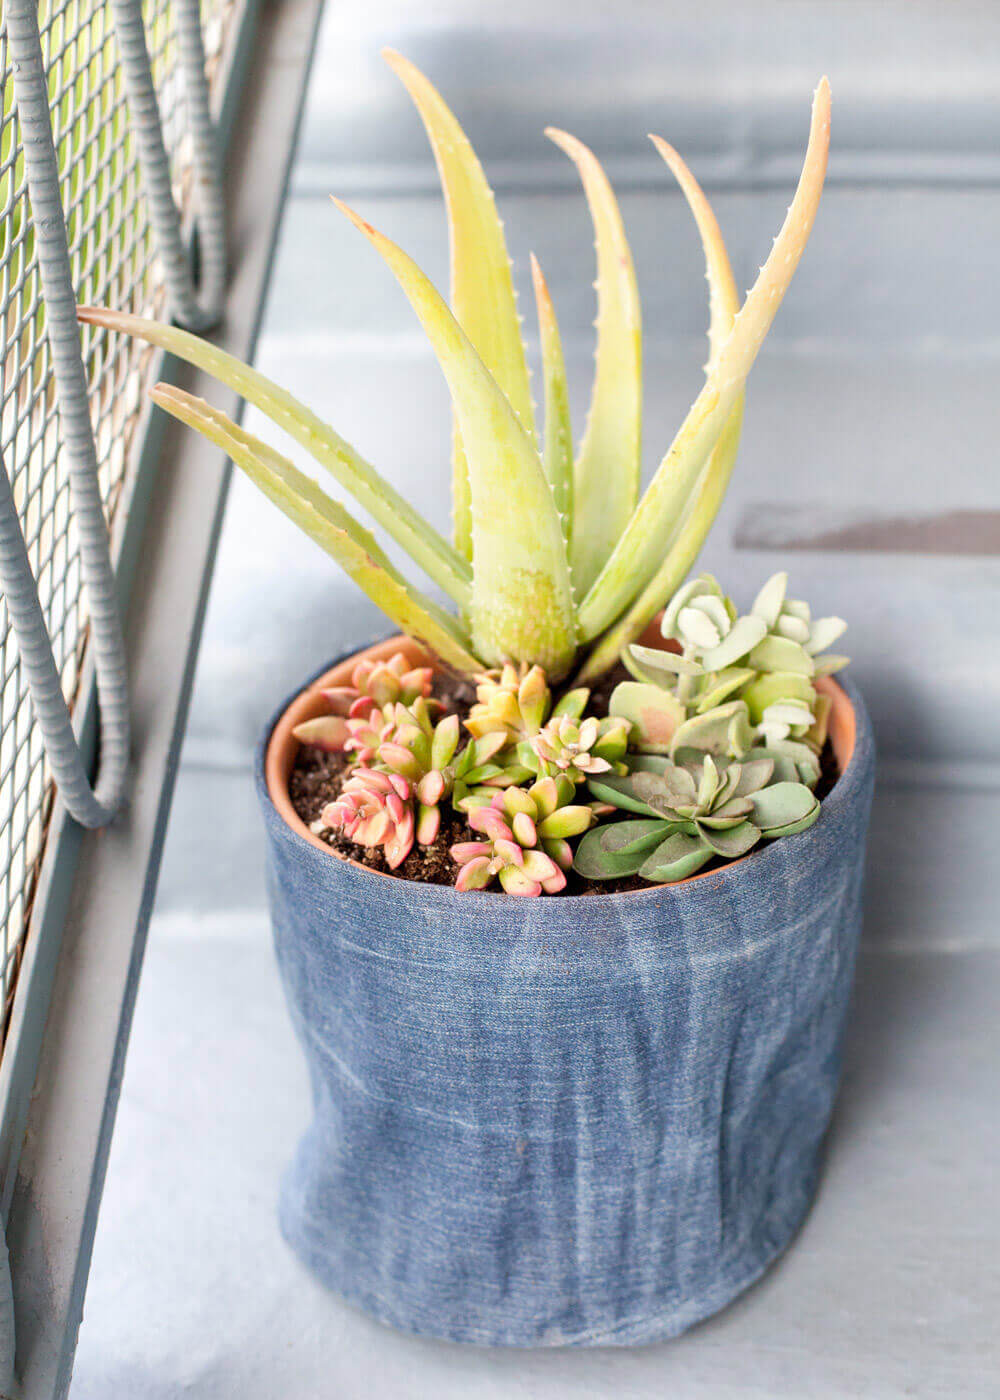 Your Plants’ Favorite Pair of Jeans